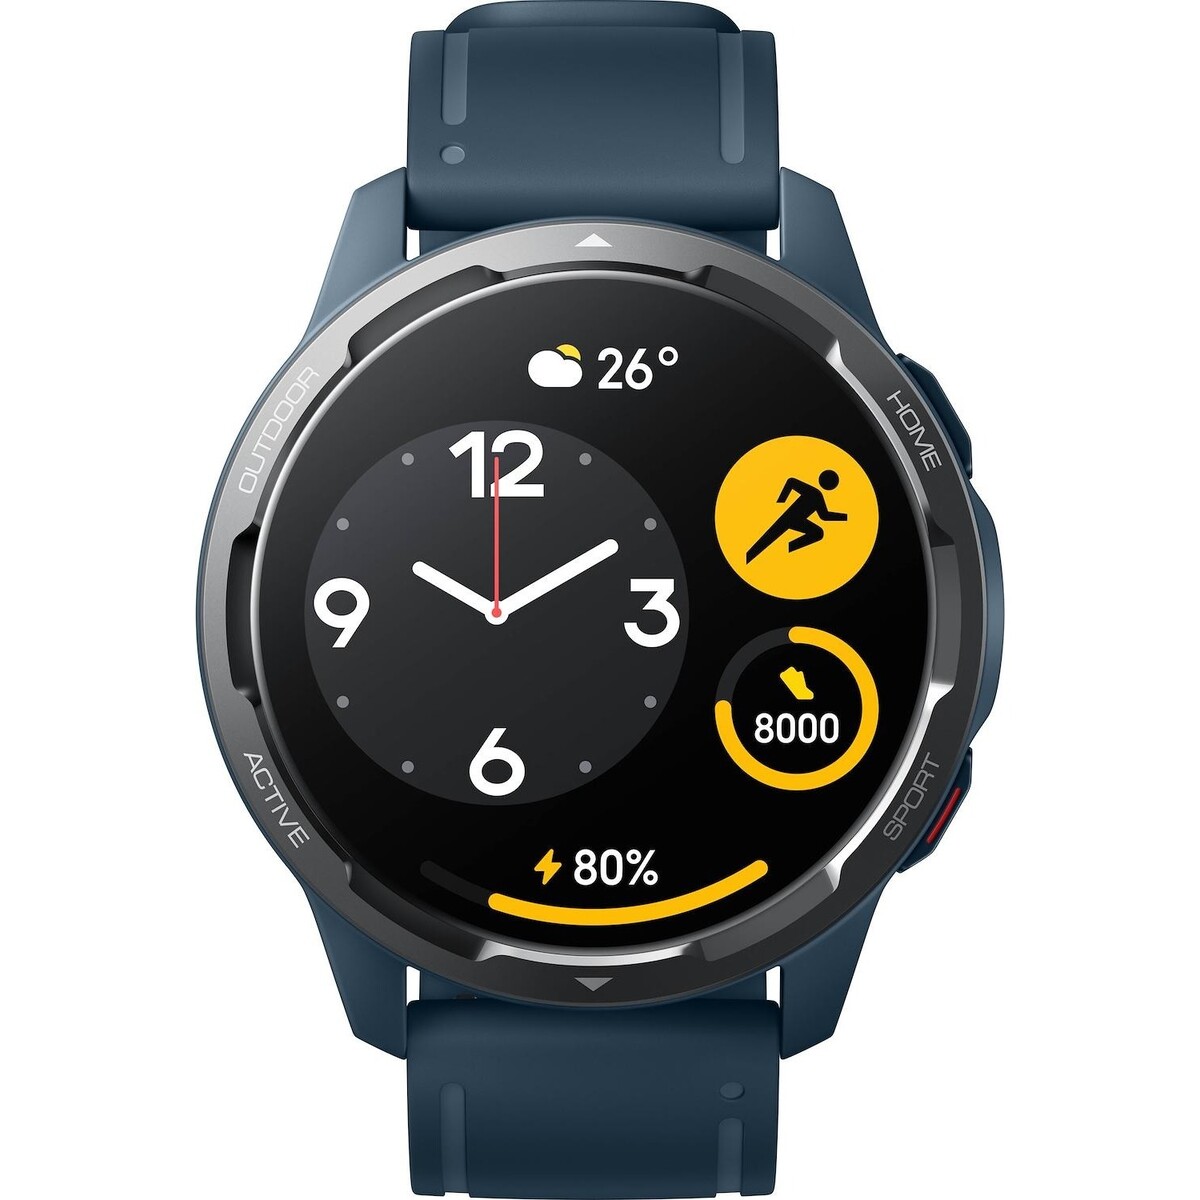 Xiaomi Watch S1 receives quality of life improvements with 11 new apps  ahead of rumoured global launch -  News